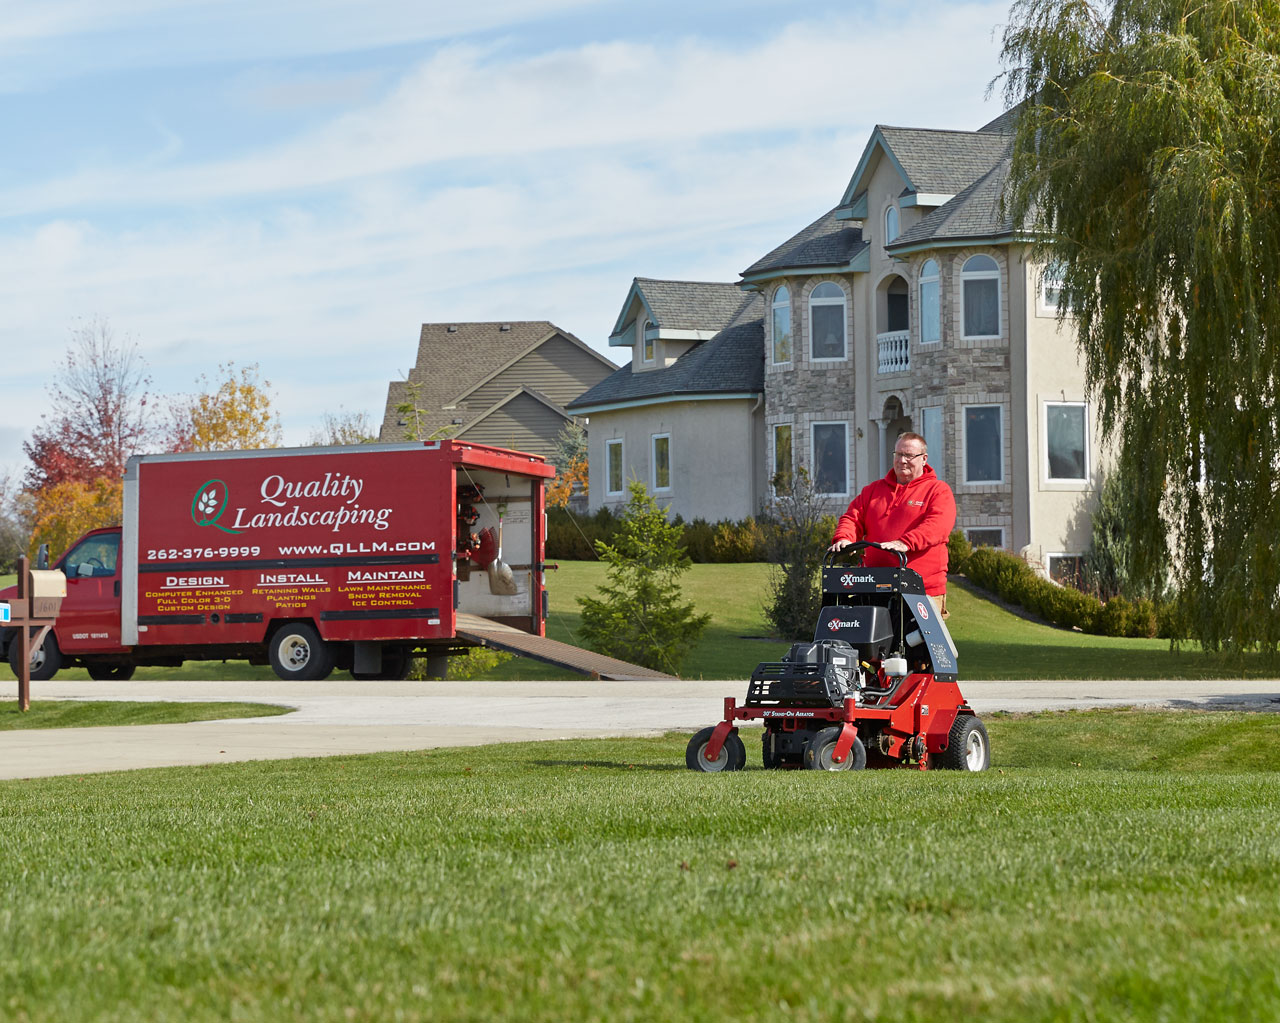 Pewaukee Lawn Care Quality Landscape, Quality Landscaping And Maintenance Services